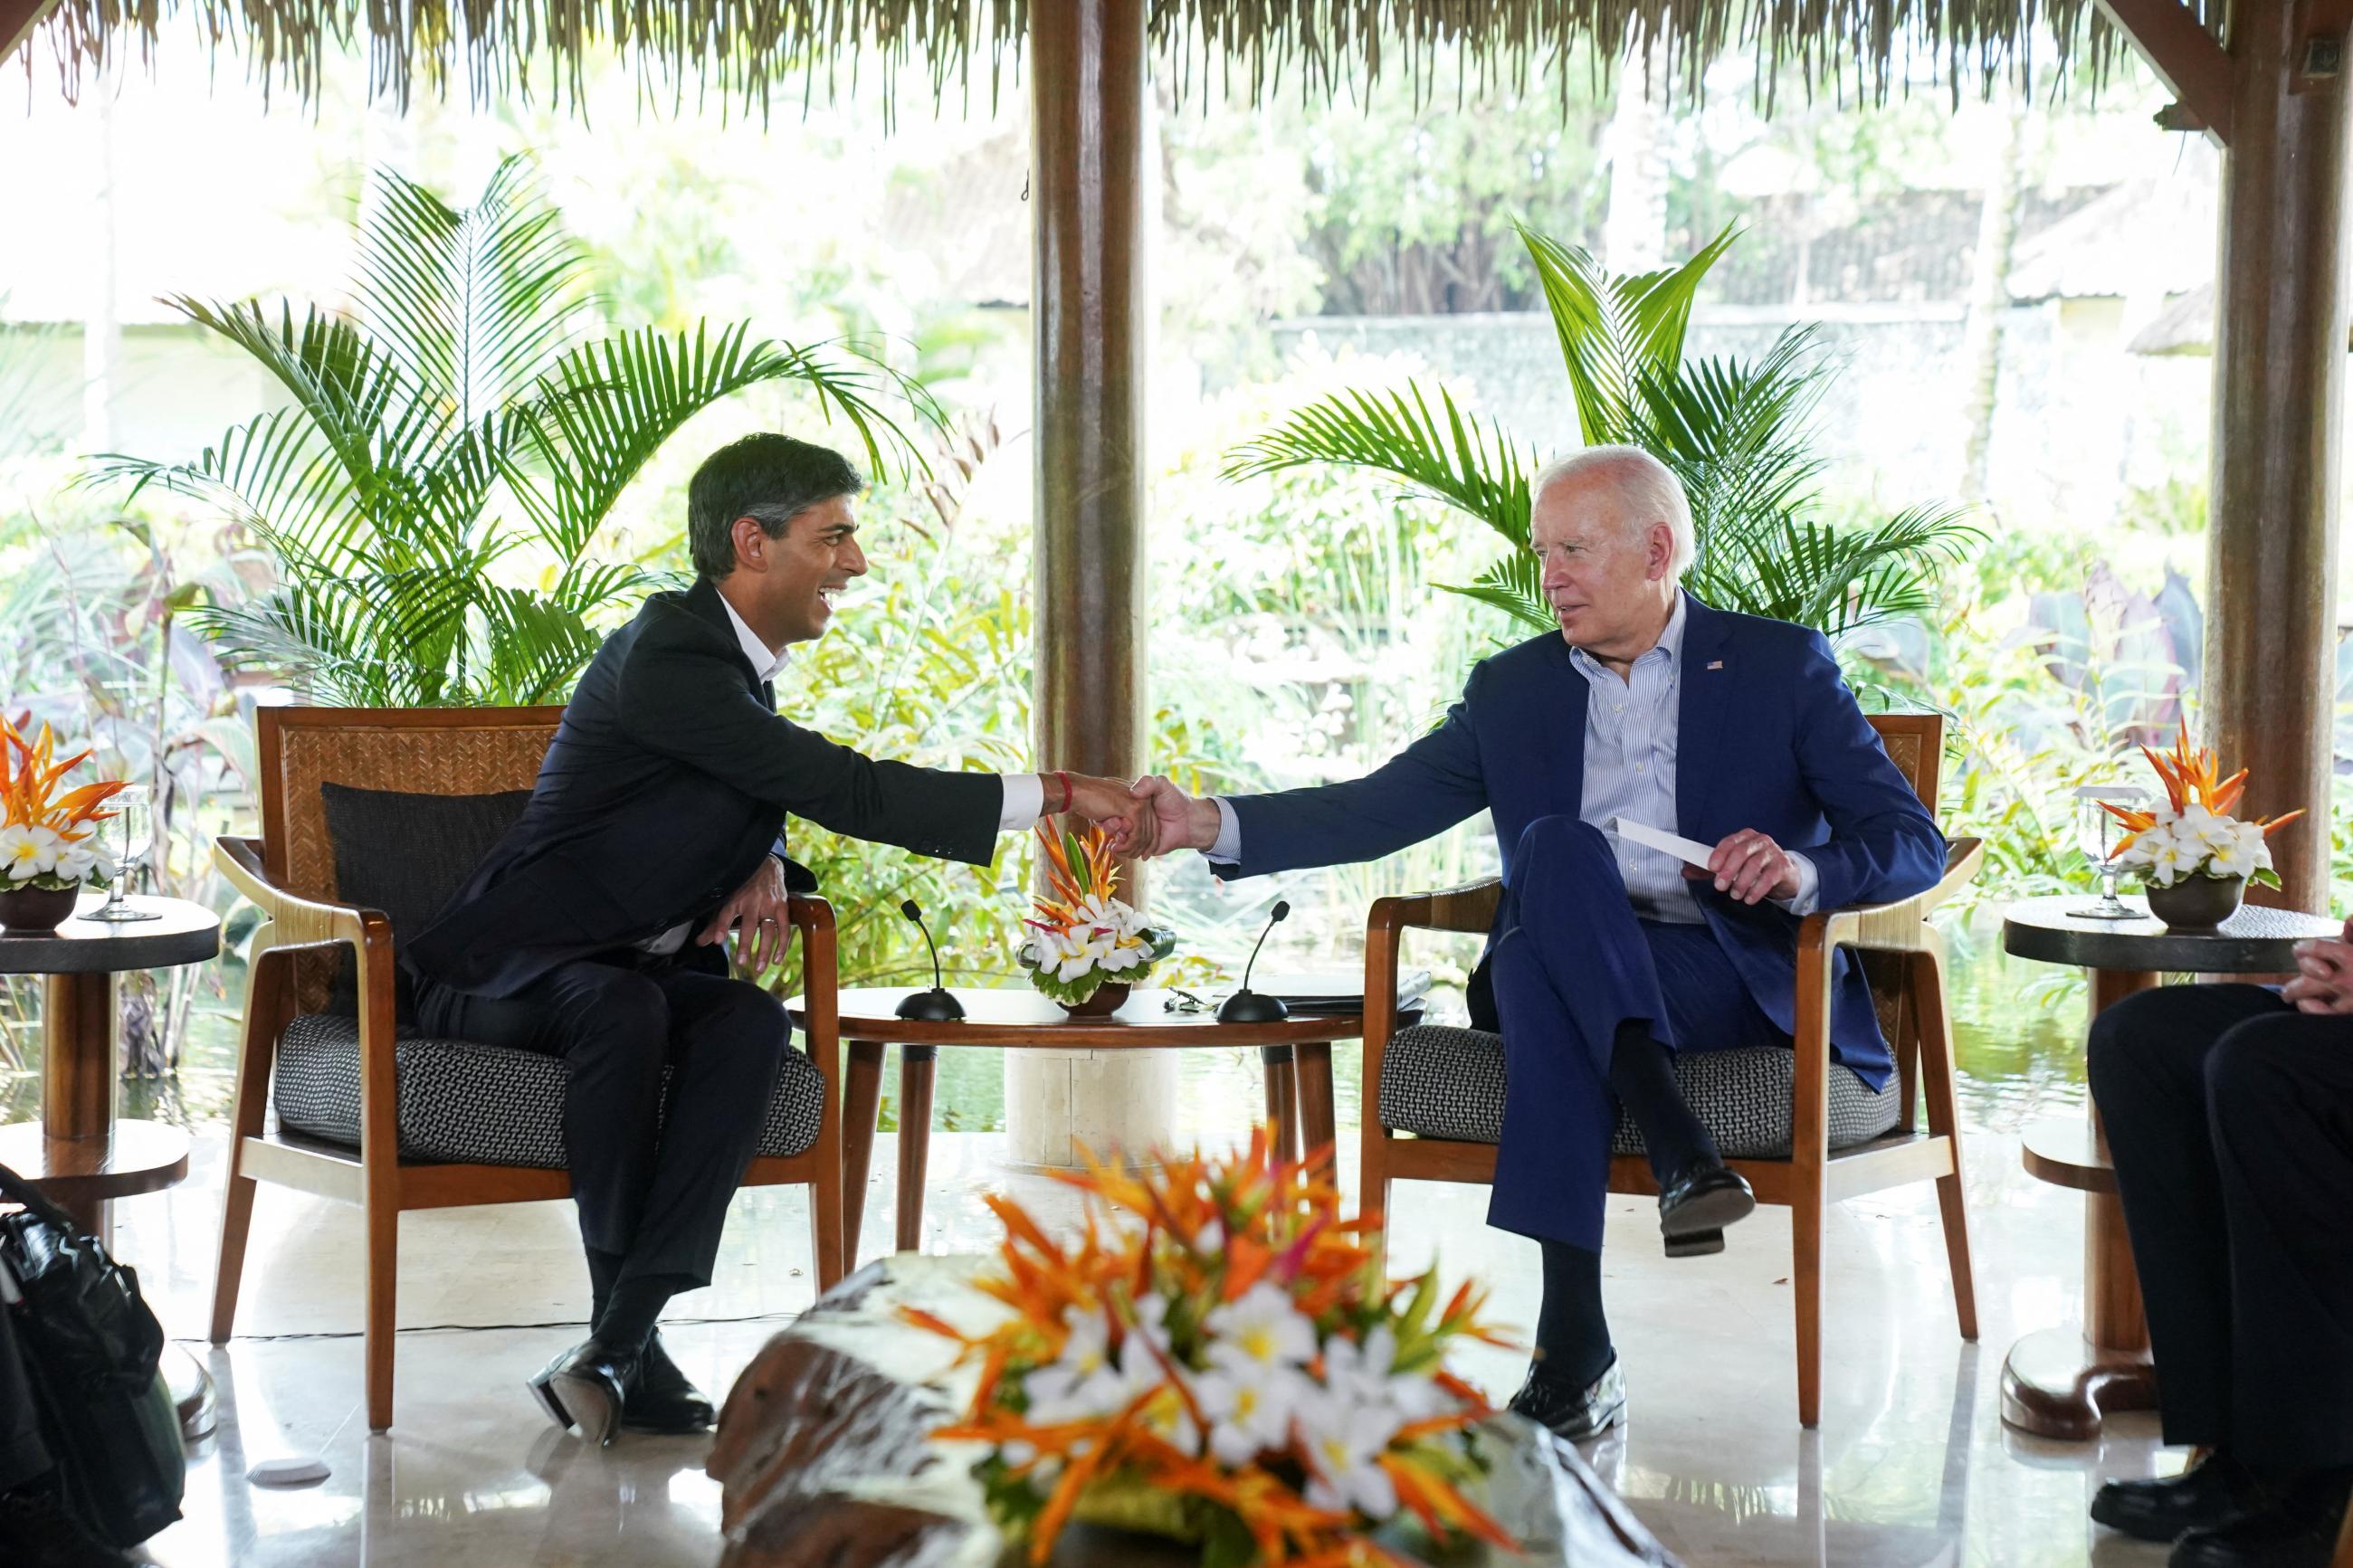 U.S. President Joe Biden meets with British Prime Minister Rishi Sunak on the sidelines of the G20 Leaders' summit in Bali, Indonesia, on November 16, 2022.